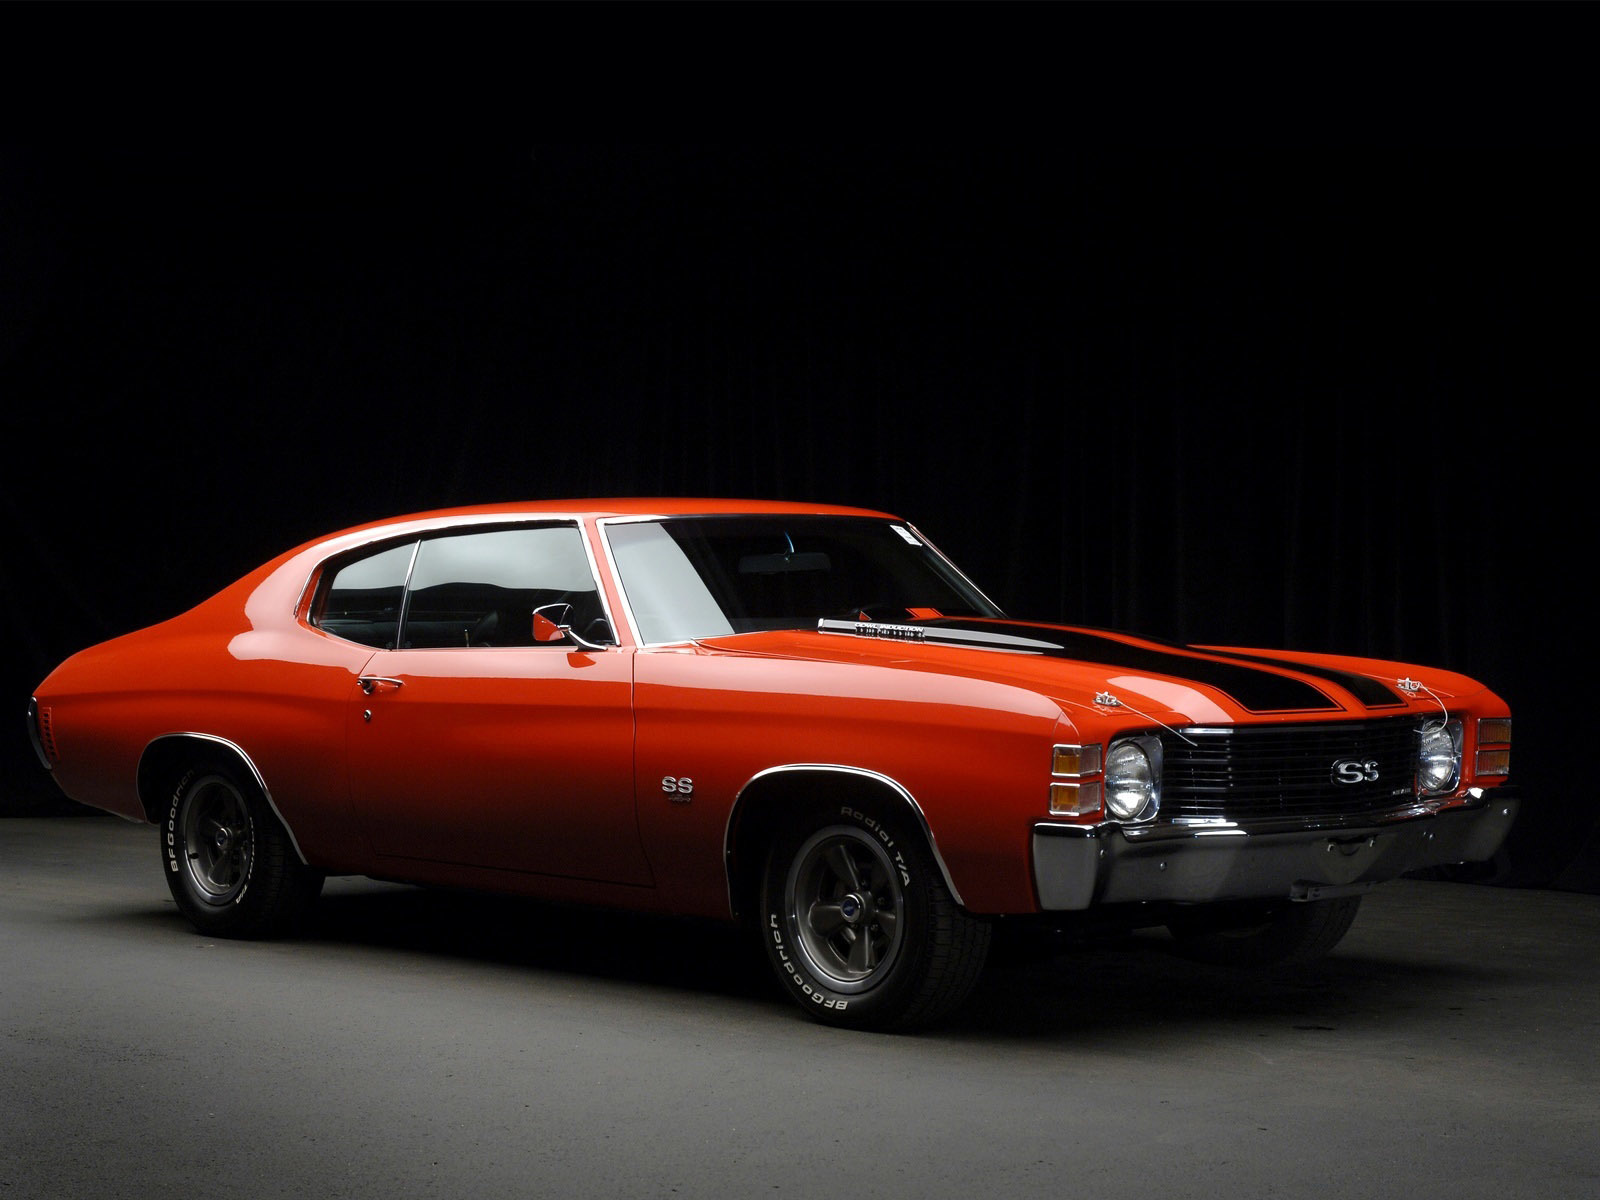 Cool  Wallpapers on Wallpapers On Muscle Cars Chevrolet Chevelle Ss Hd Wallpaper Cars